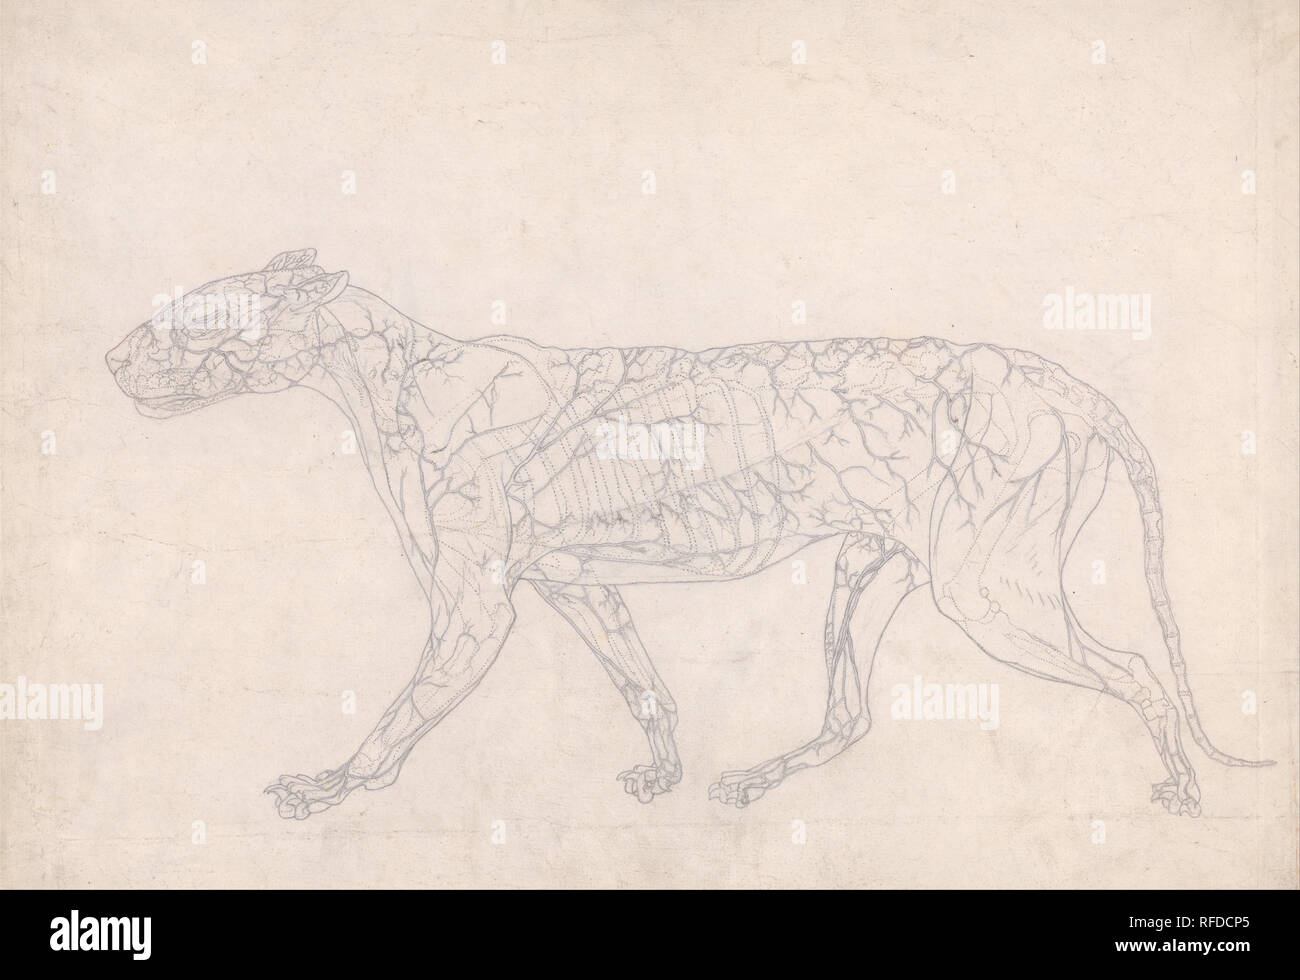 A Comparative Anatomical Exposition of the Structure of the Human Body with That of a Tiger and a Common Fowl: Tiger, Lateral View (Outline Study of the Surface Blood Supply, Prepared for the Key Figure to Table IX). Date/Period: Between 1795 and 1806. Drawing. Graphite and red chalk; verso: graphite and red and black chalk on thin, slightly textured, cream wove paper. Height: 406 mm (15.98 in); Width: 533 mm (20.98 in). Author: George Stubbs. Stock Photo